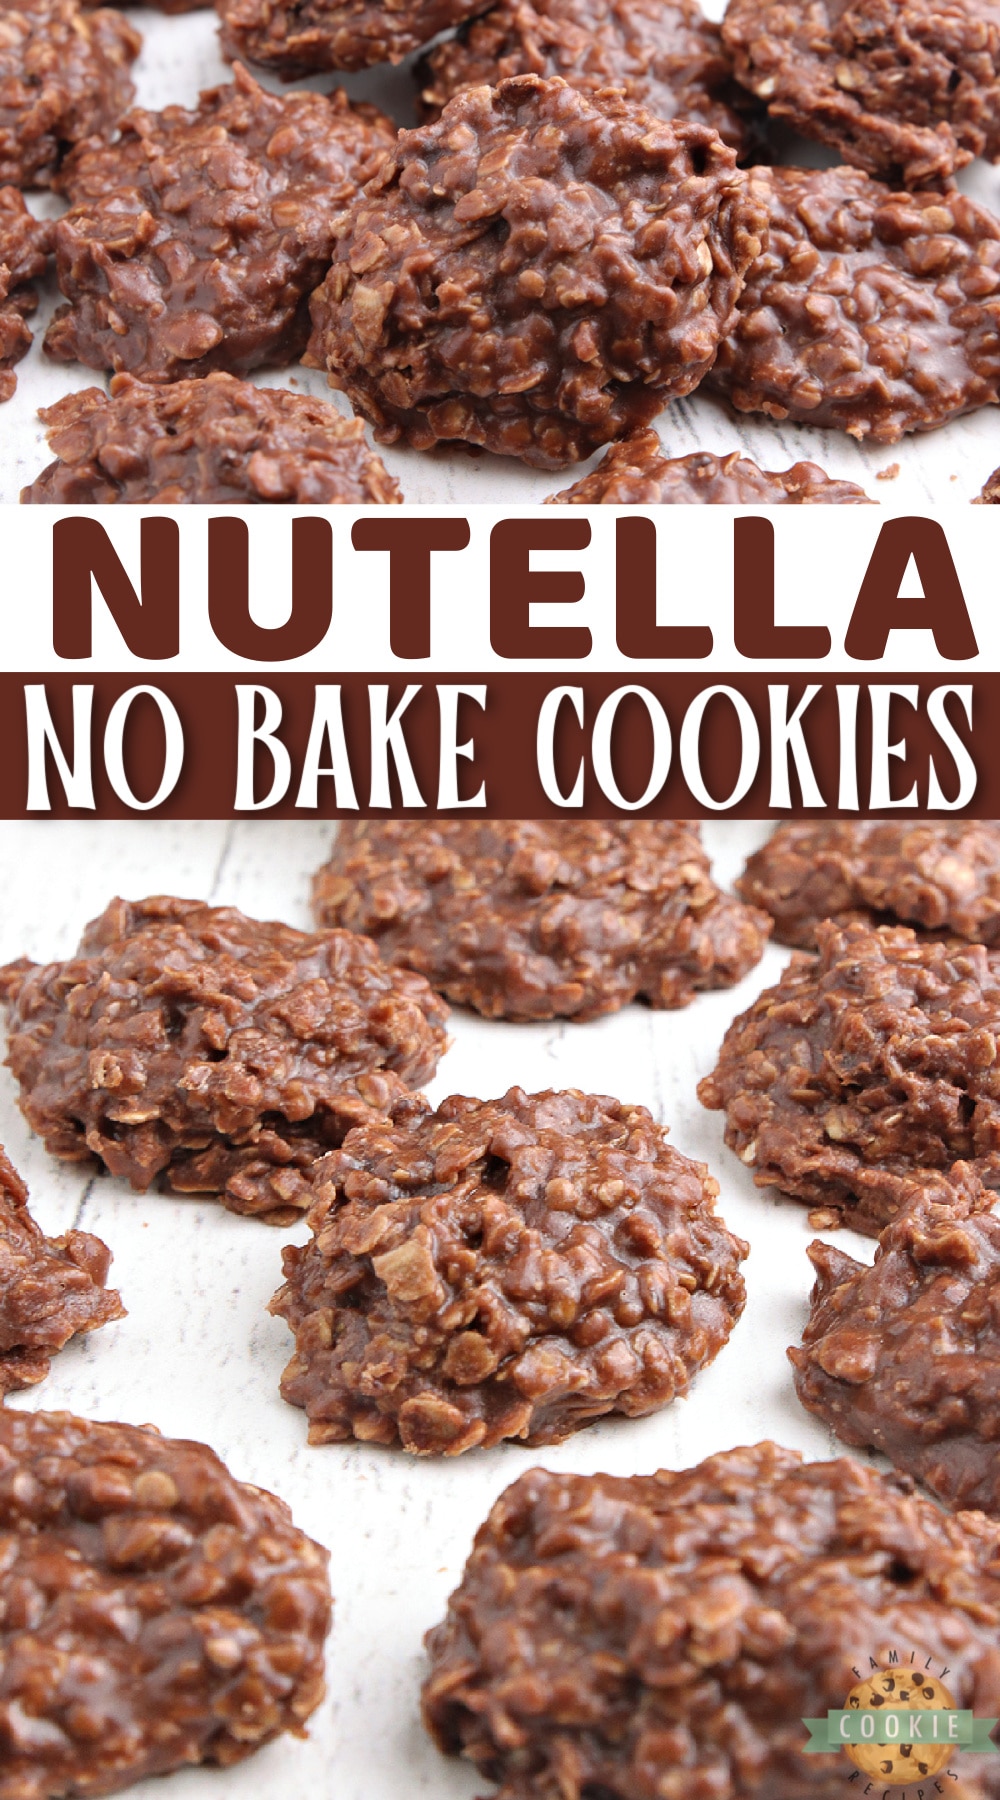 Nutella No Bake Cookies are just like traditional no bake cookies, but with Nutella instead of peanut butter. Made 